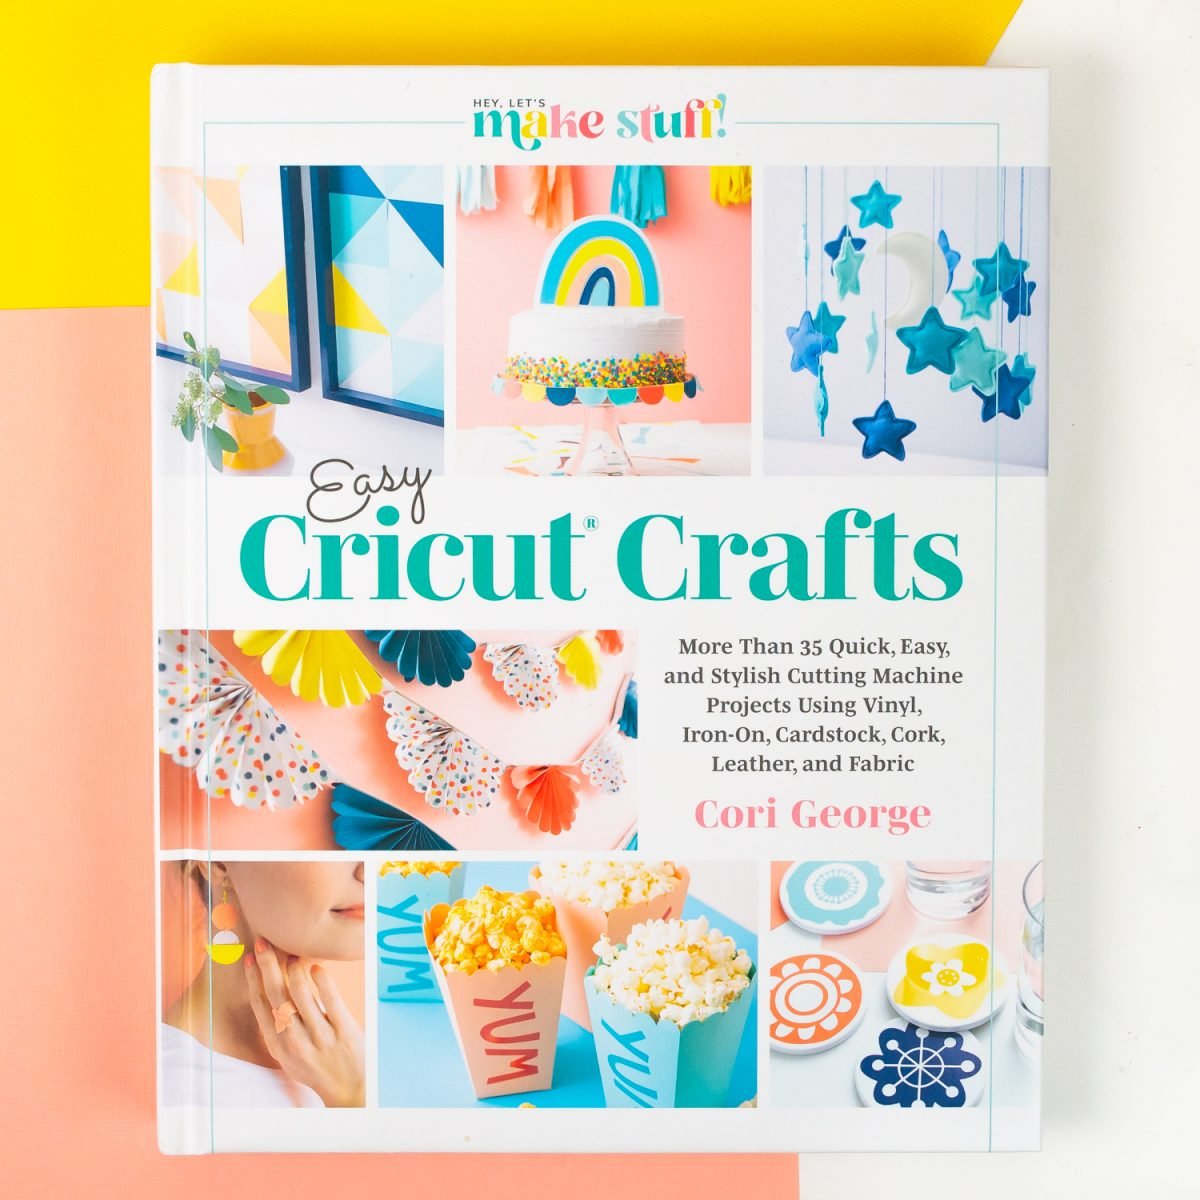 Easy Cricut Crafts book on pink and yellow background.